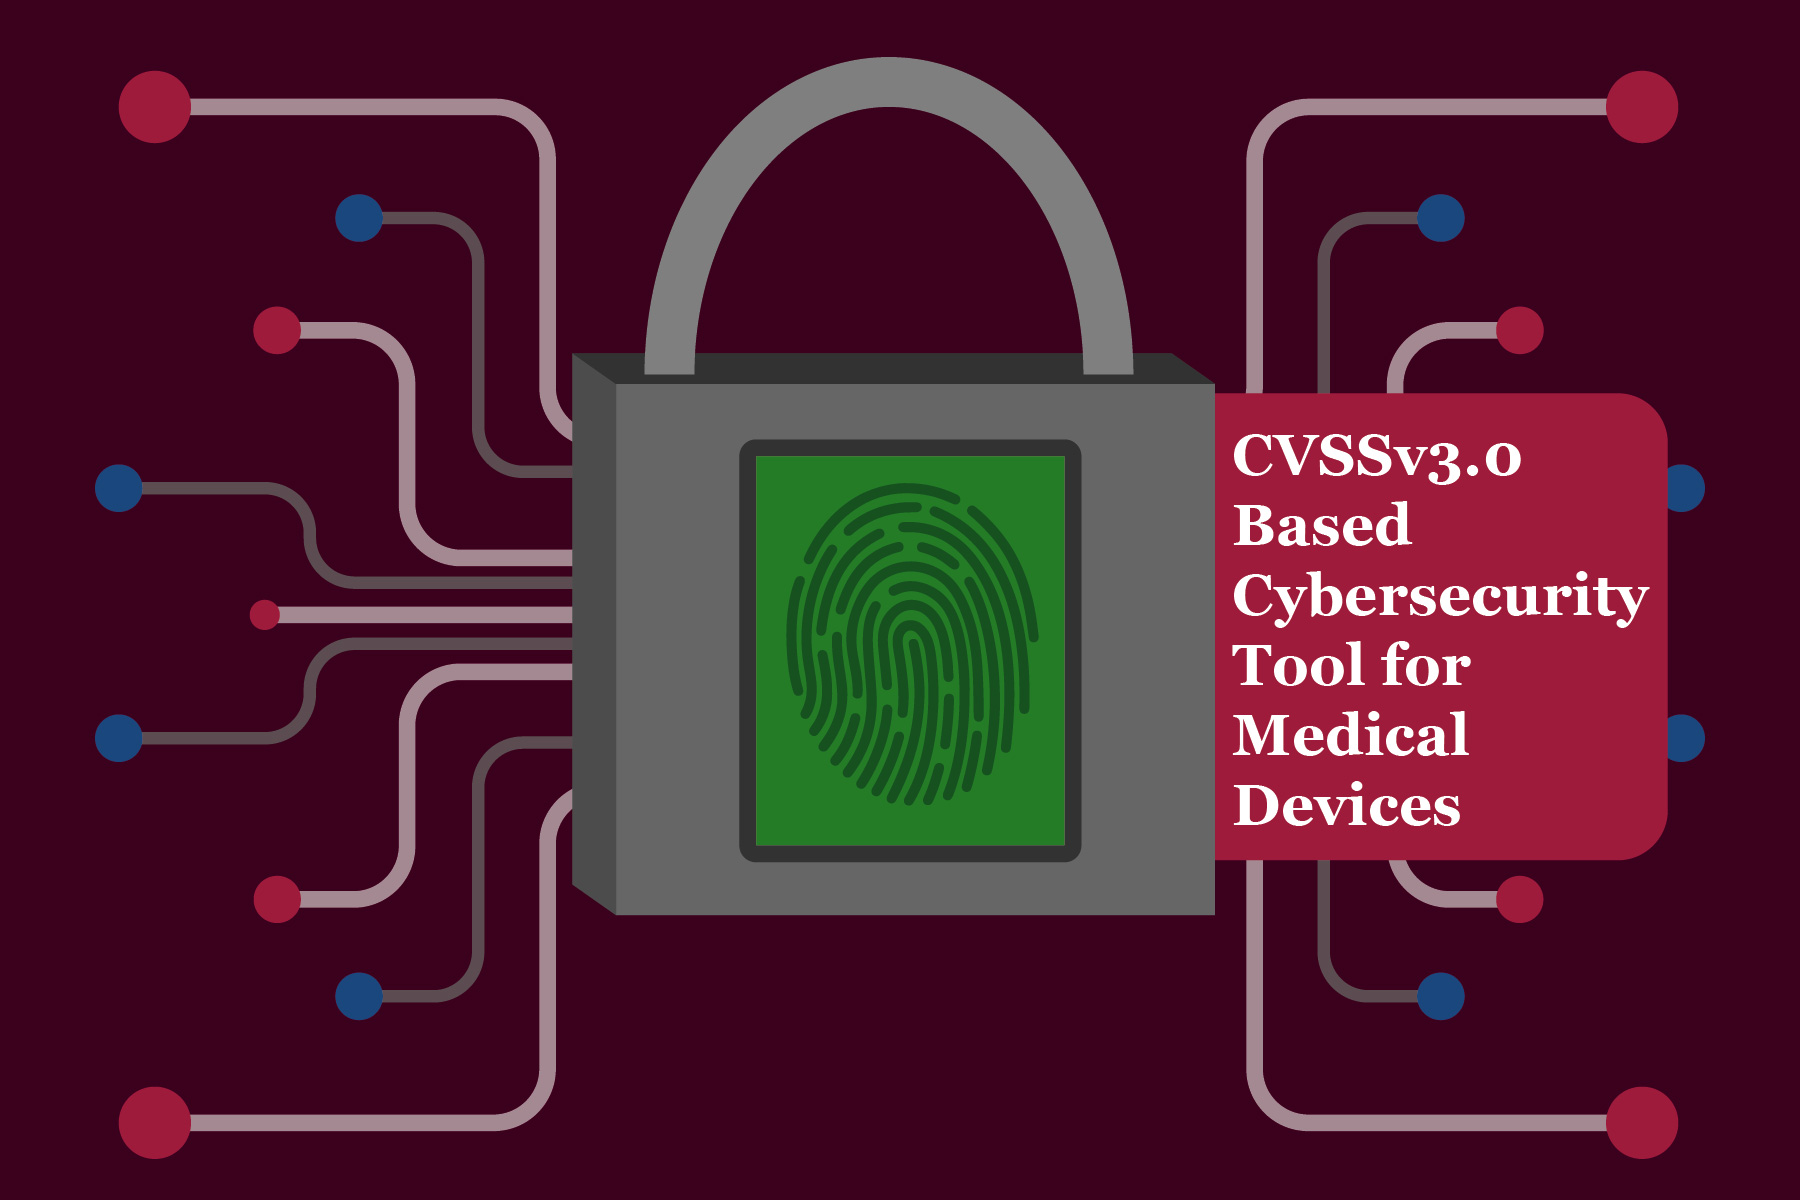 CVSSv3.0 Based Cybersecurity Tool for Medical Devices